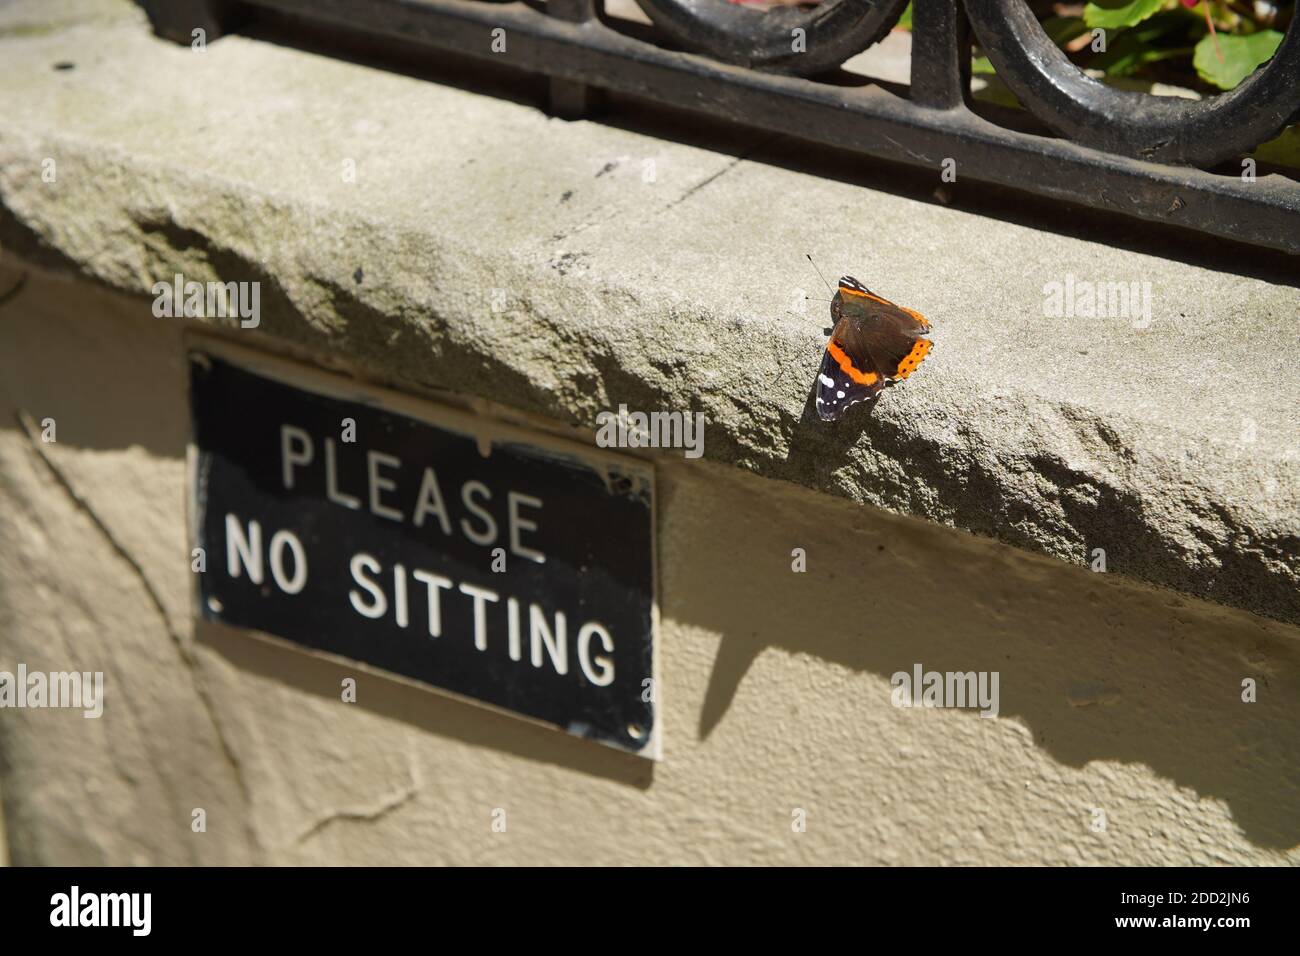 A butterfly in Harlem defies the rules by sitting in a 'no sitting' area Stock Photo